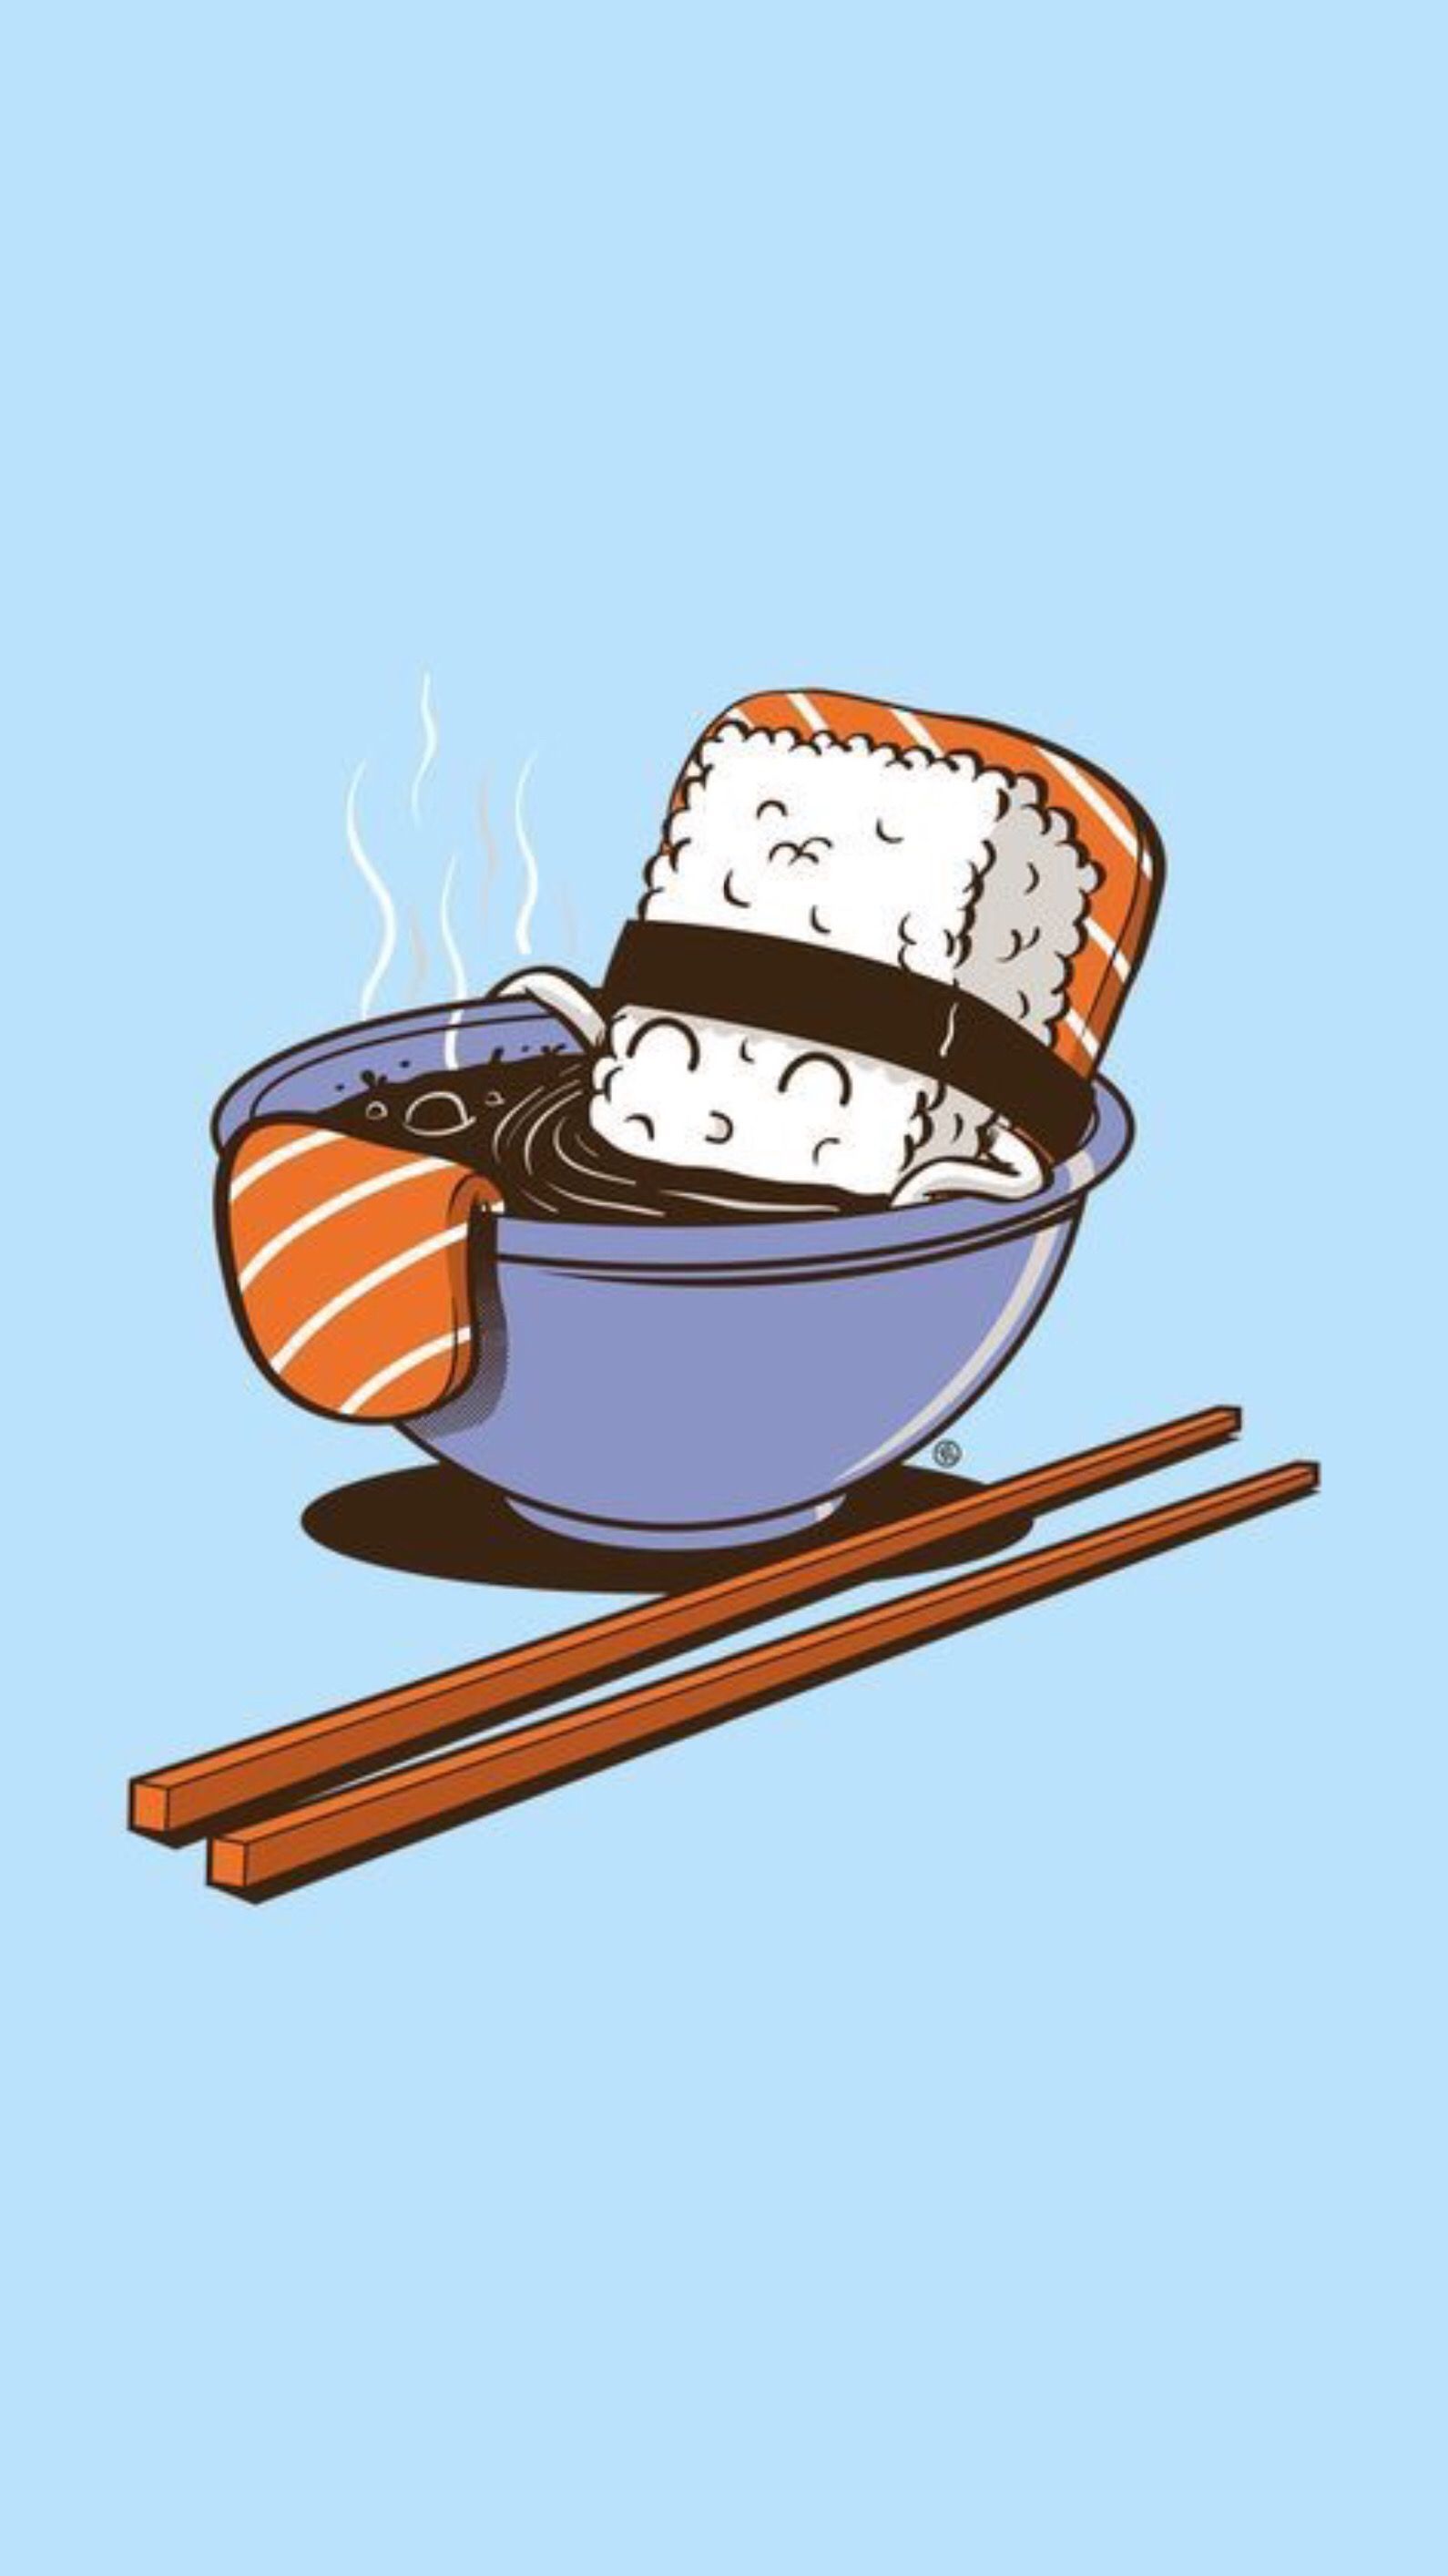 A bowl of sushi with chopsticks and an eye - Sushi